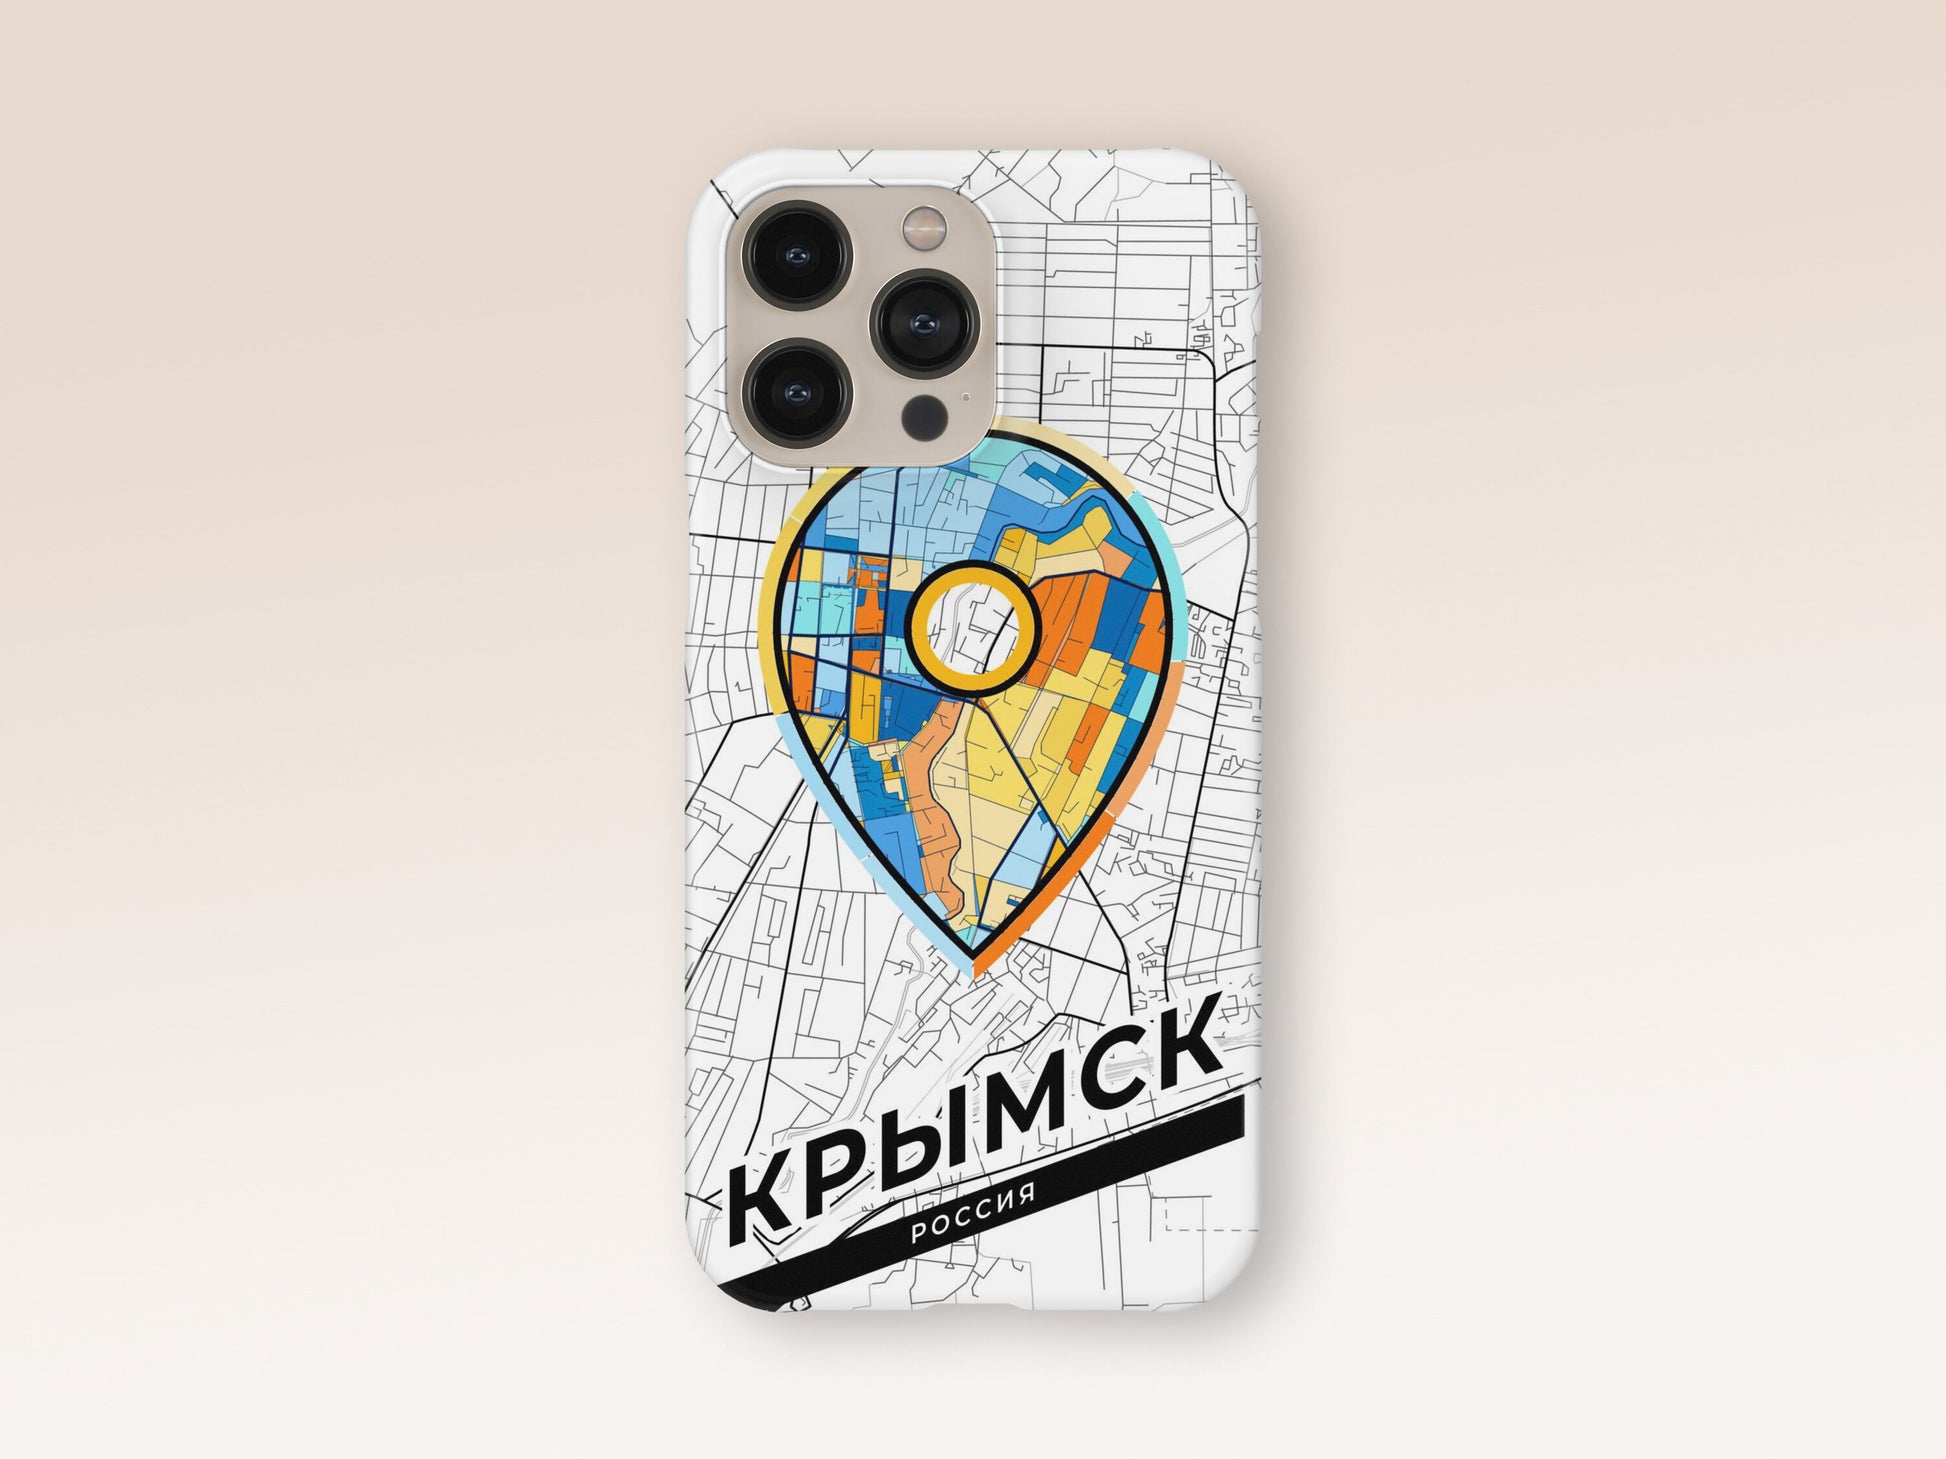 Krymsk Russia slim phone case with colorful icon. Birthday, wedding or housewarming gift. Couple match cases. 1